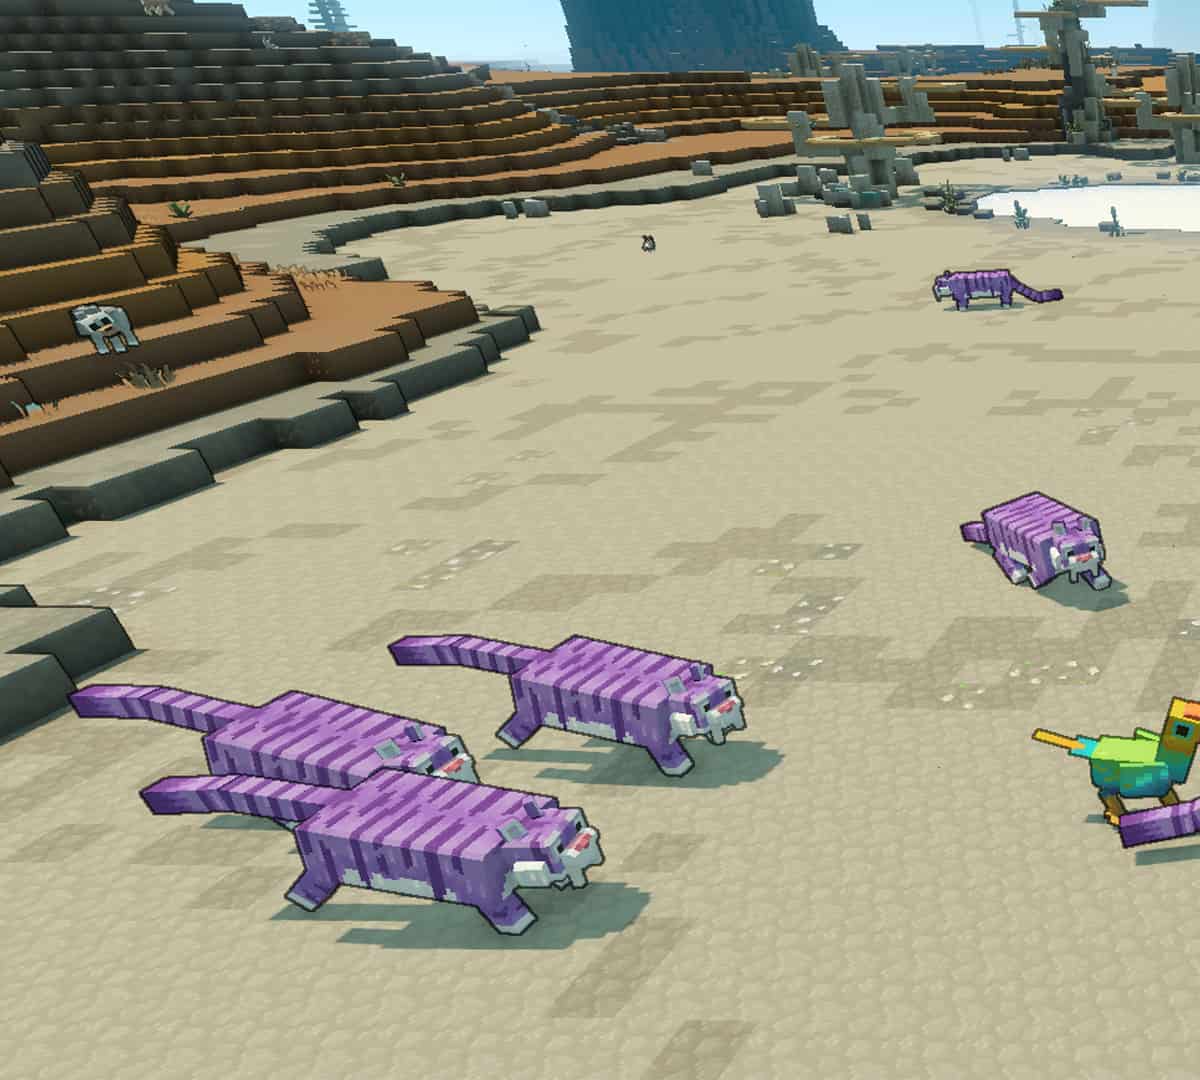 Minecraft Legends mounts: The player character riding the Regal Tiger in a desert.